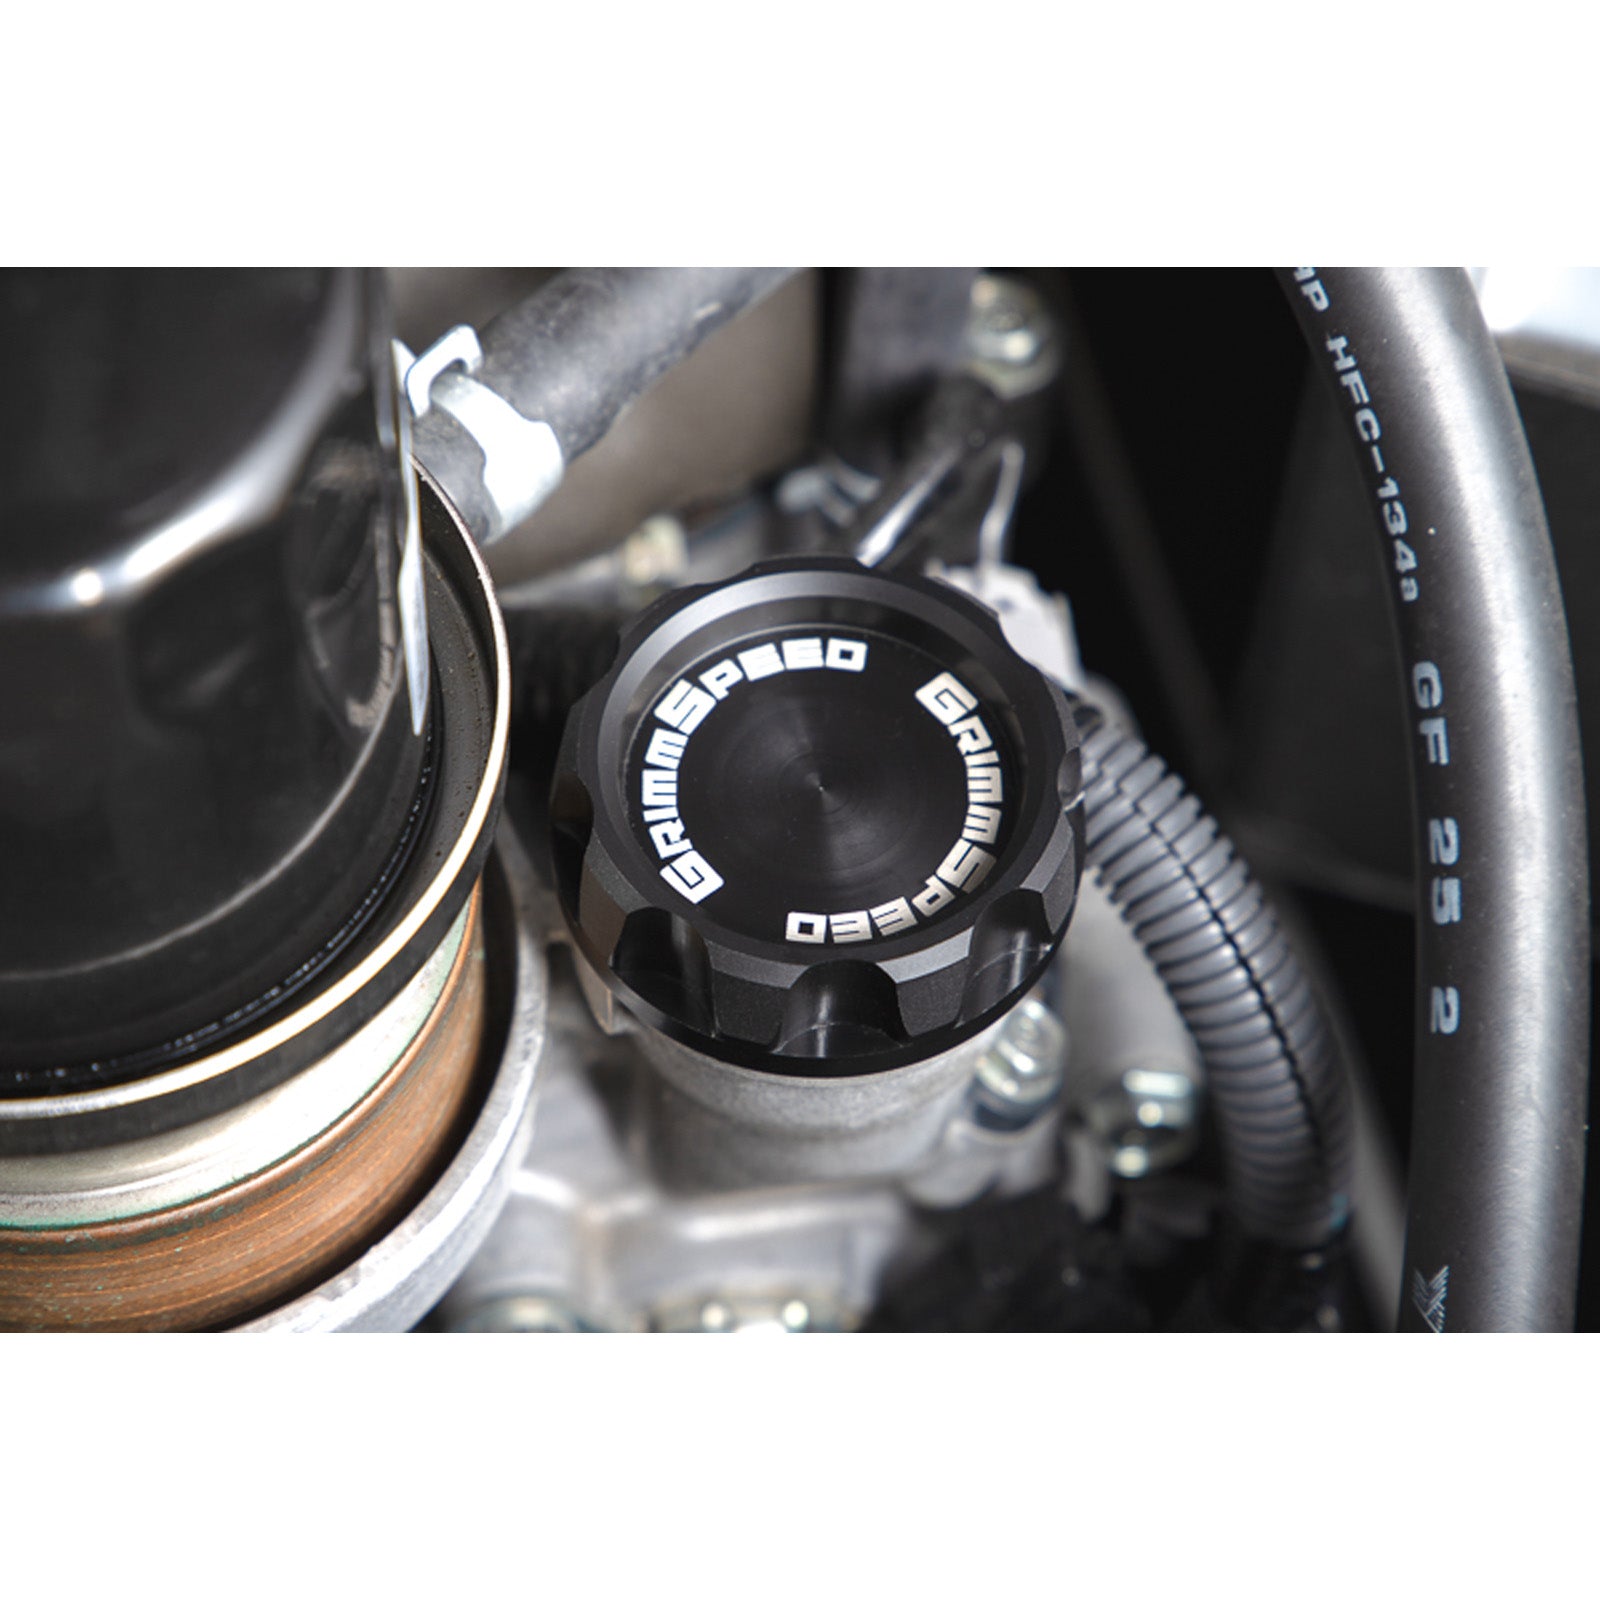 GrimmSpeed Delrin "Cool Touch" Oil Cap